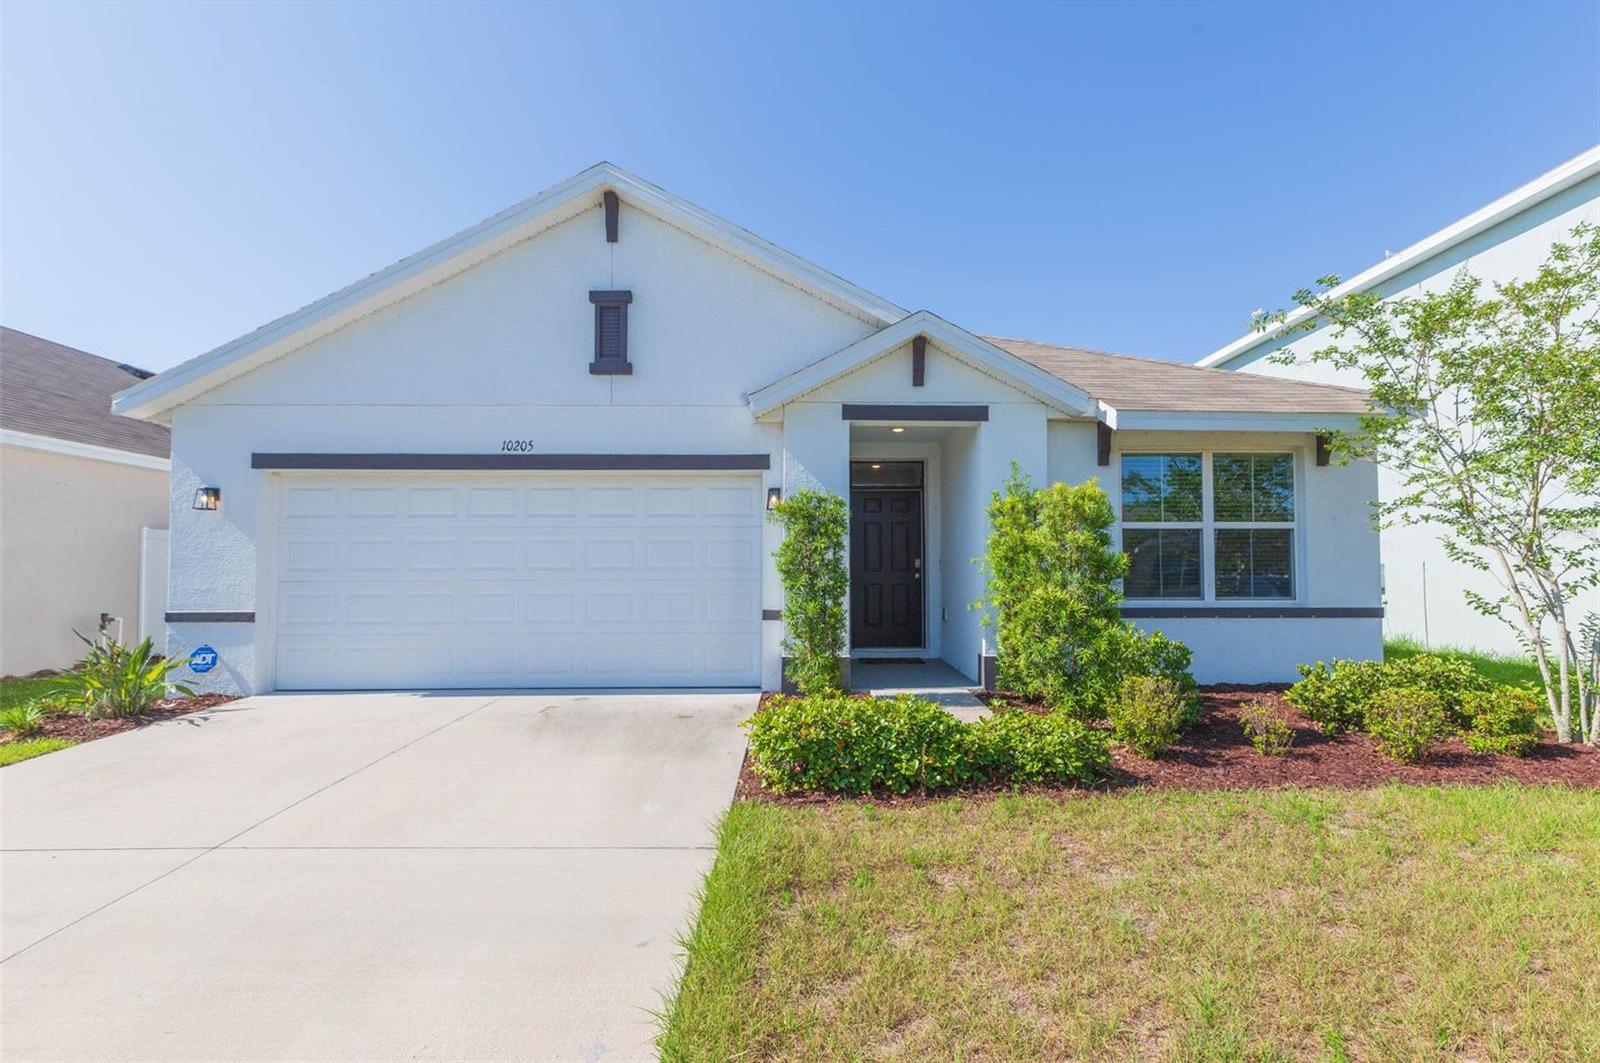 Photo one of 10205 Golden Light Ct Riverview FL 33578 | MLS T3507195